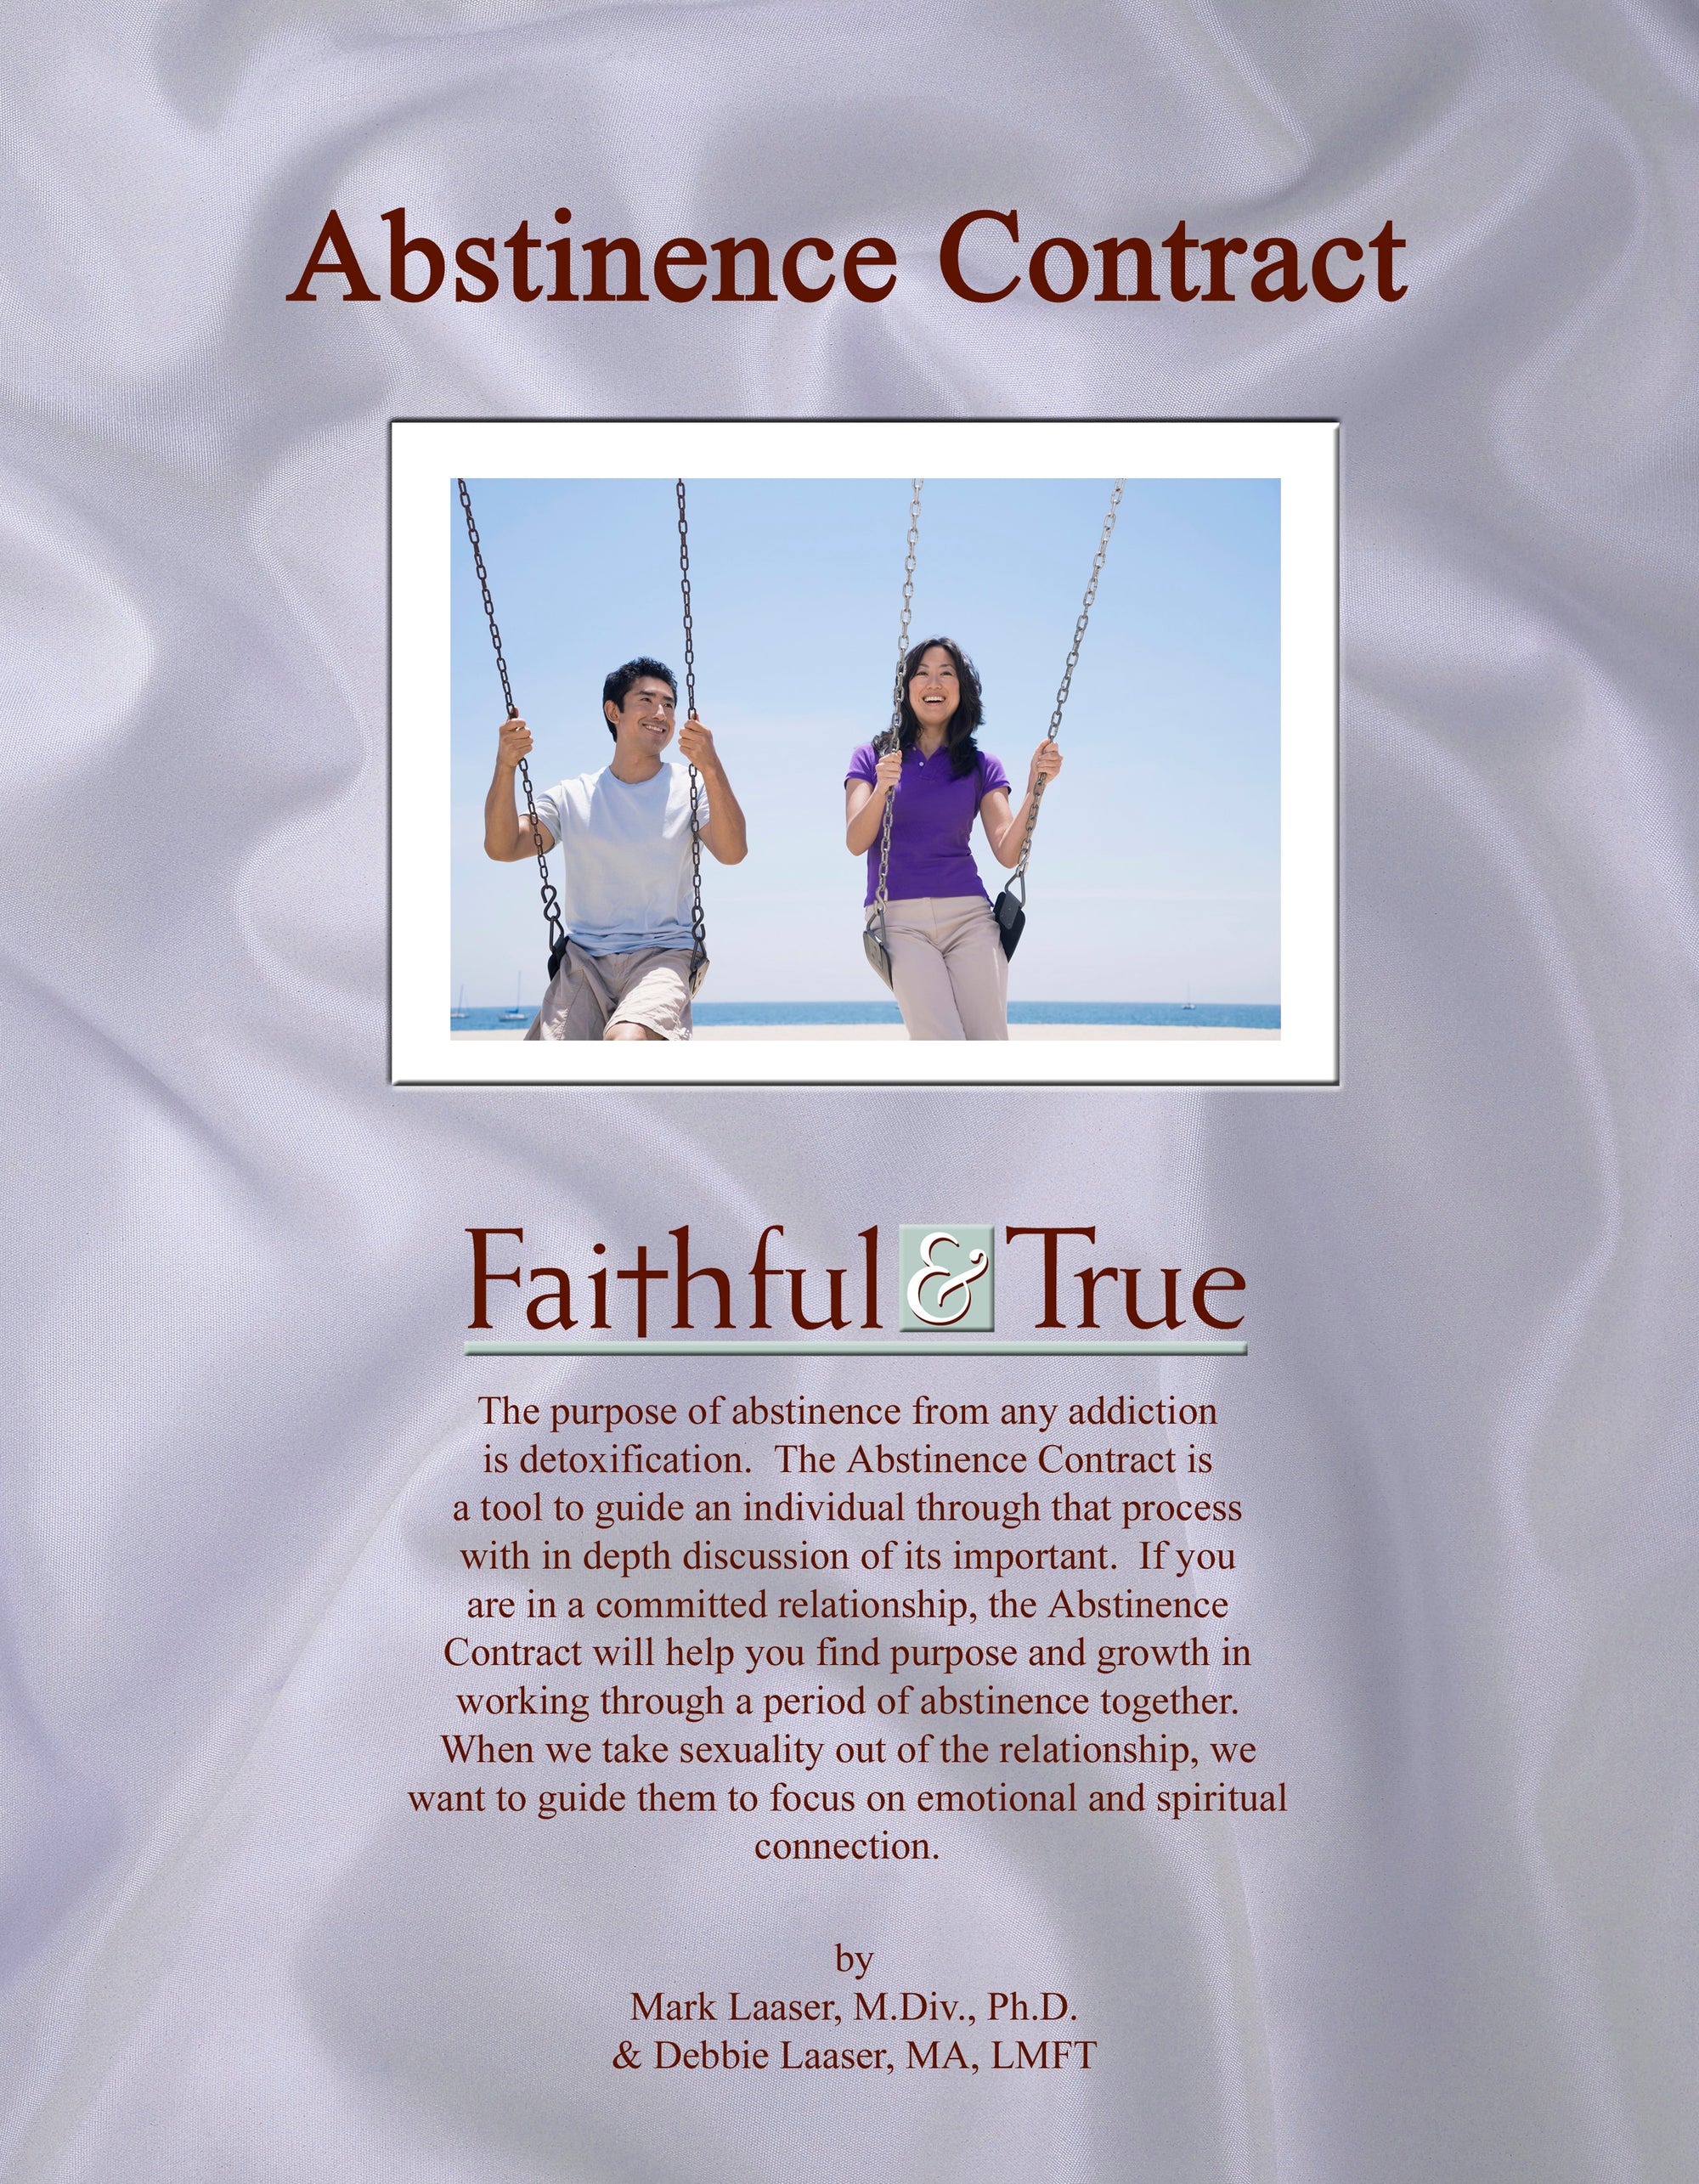 Abstinence Contract PDF